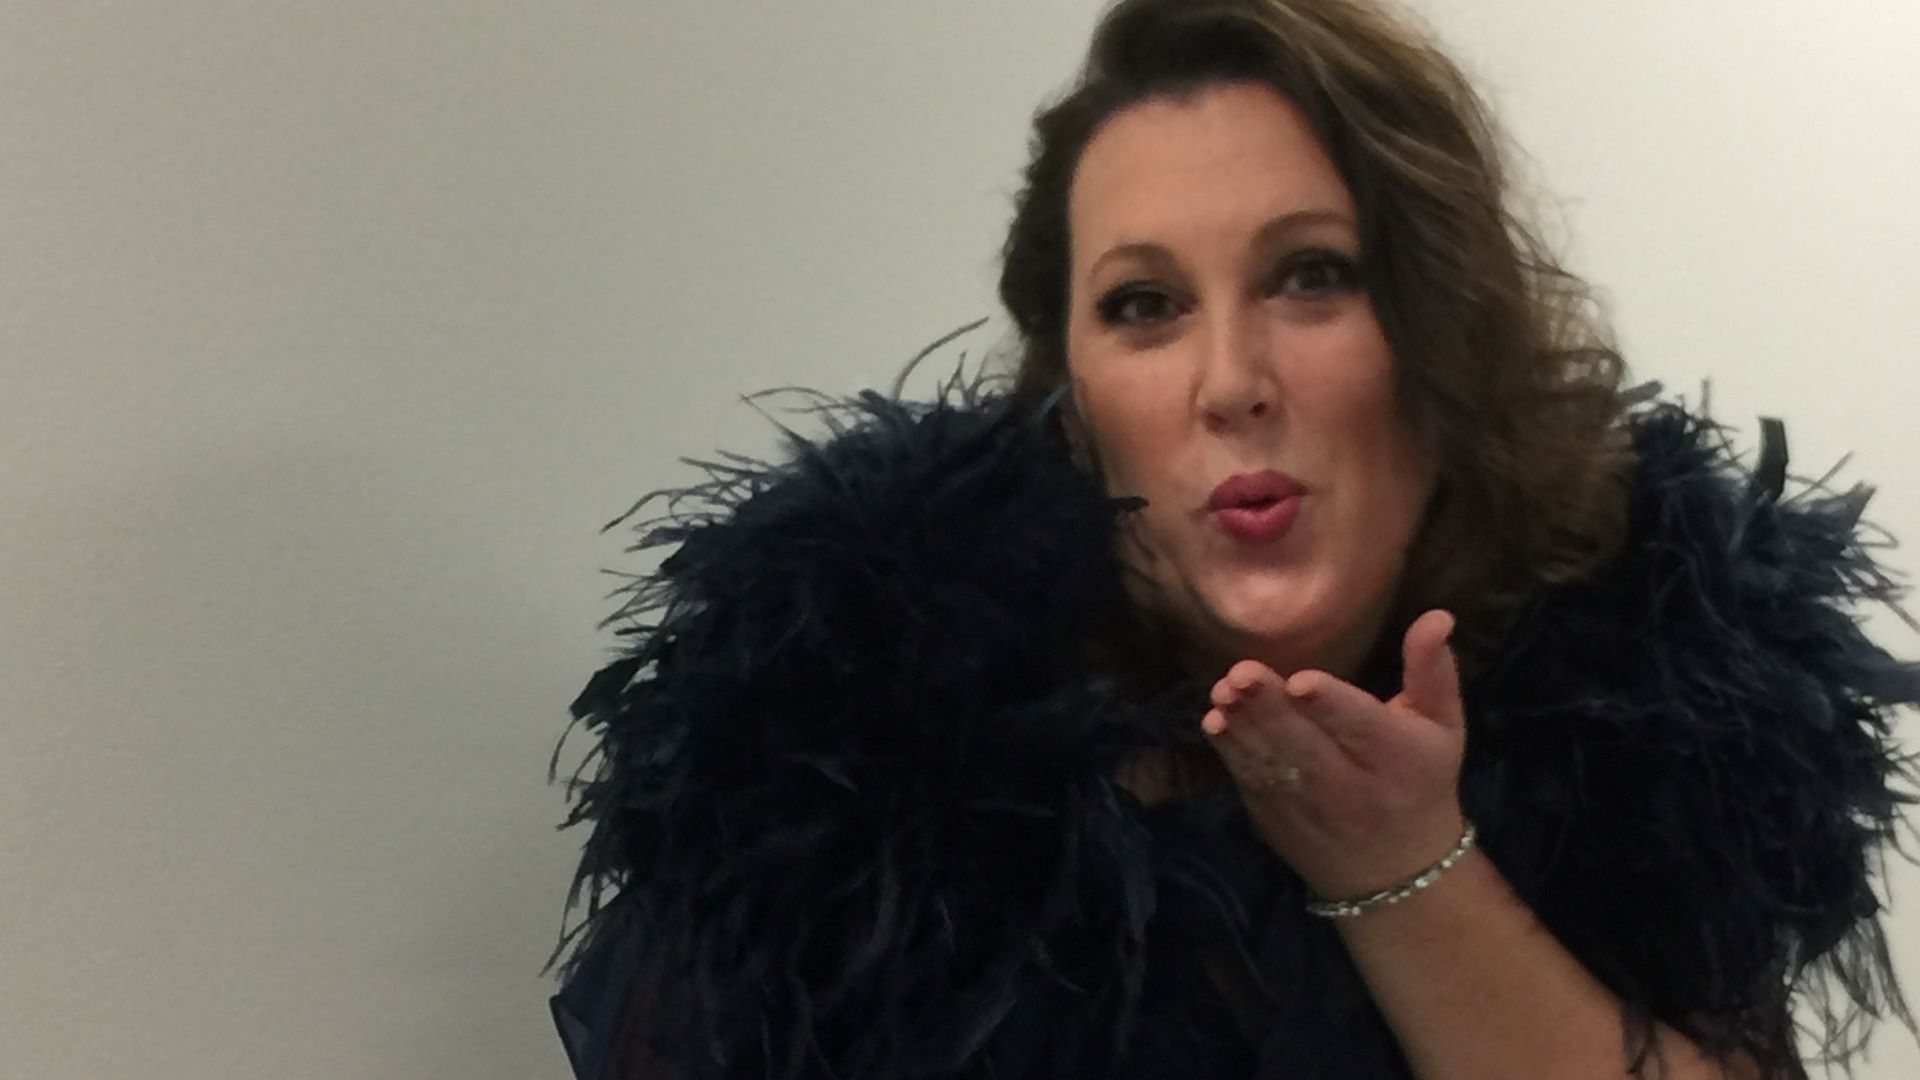 Jenny Leslie in black feathers at the ball and blowing a kiss